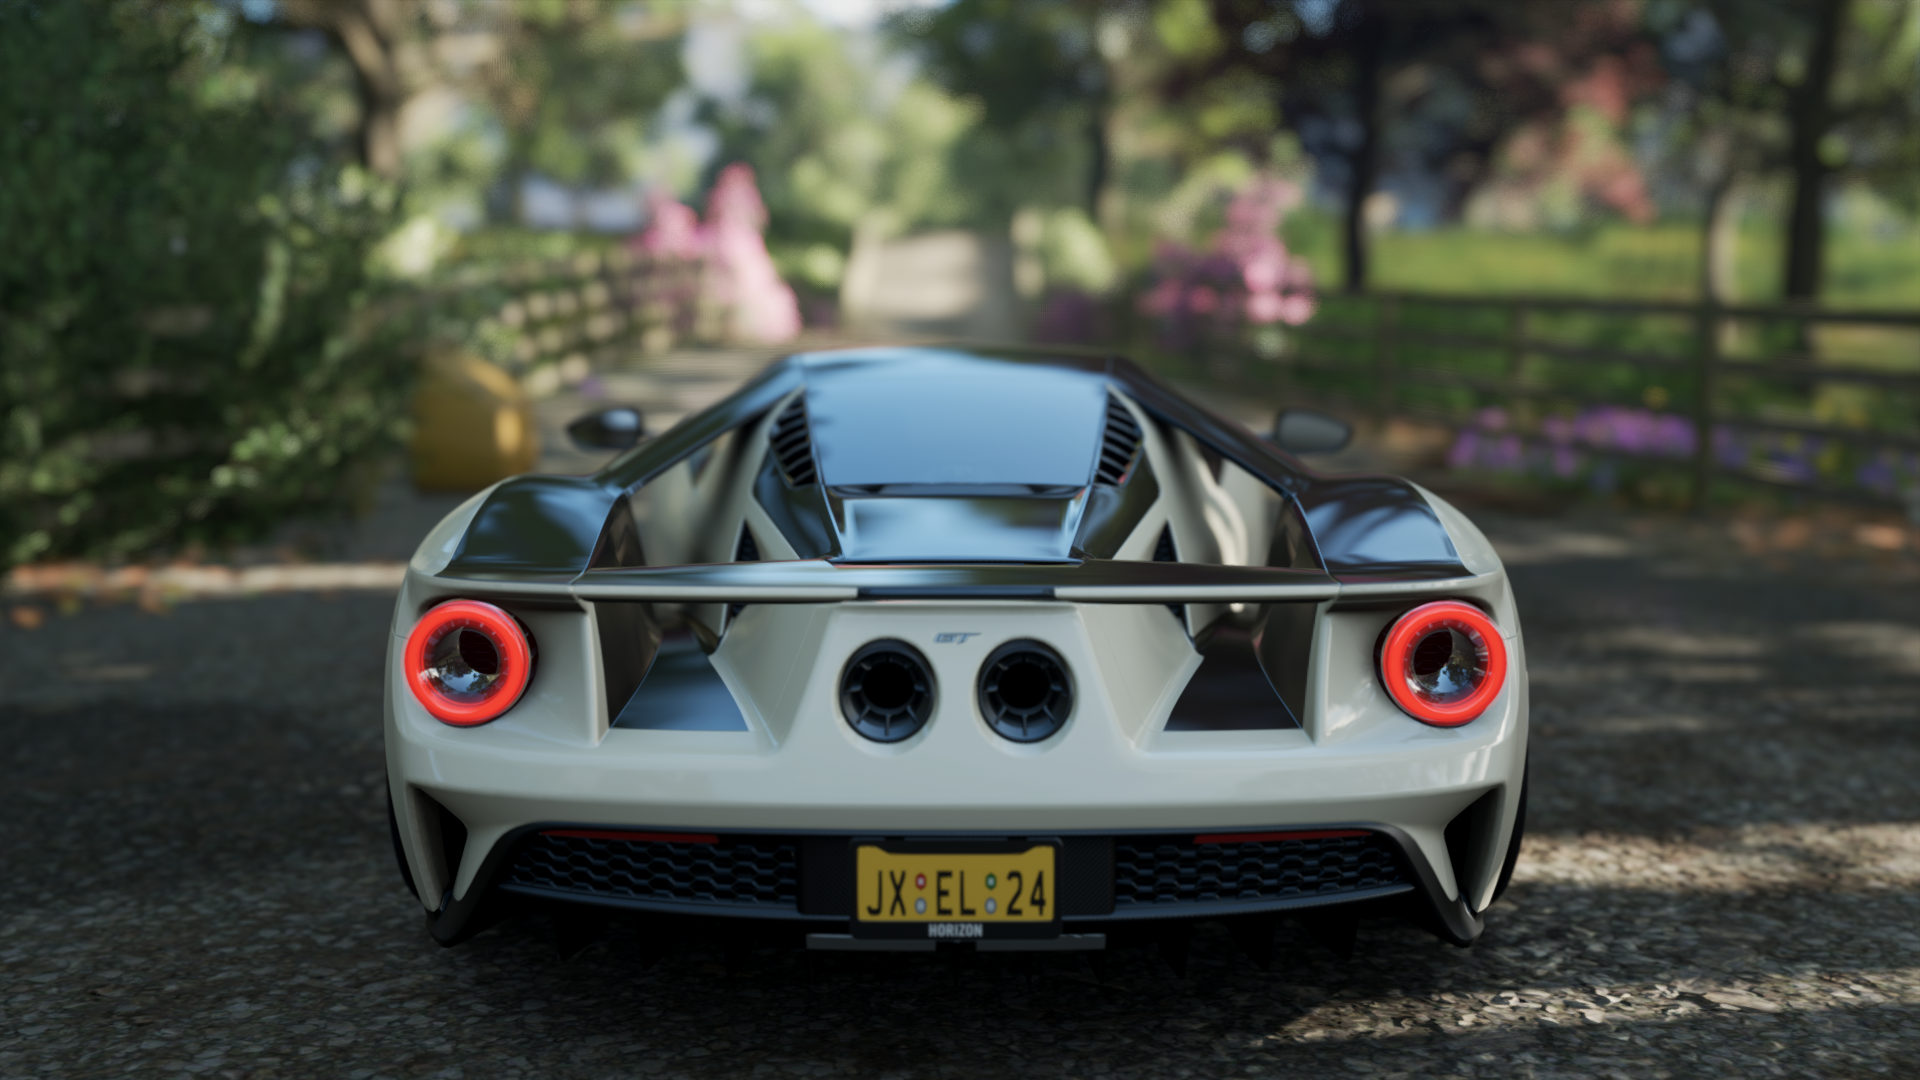 General 1920x1080 Forza Horizon 4 car vehicle video games Ford Ford GT Ford GT Mk II rear view depth of field